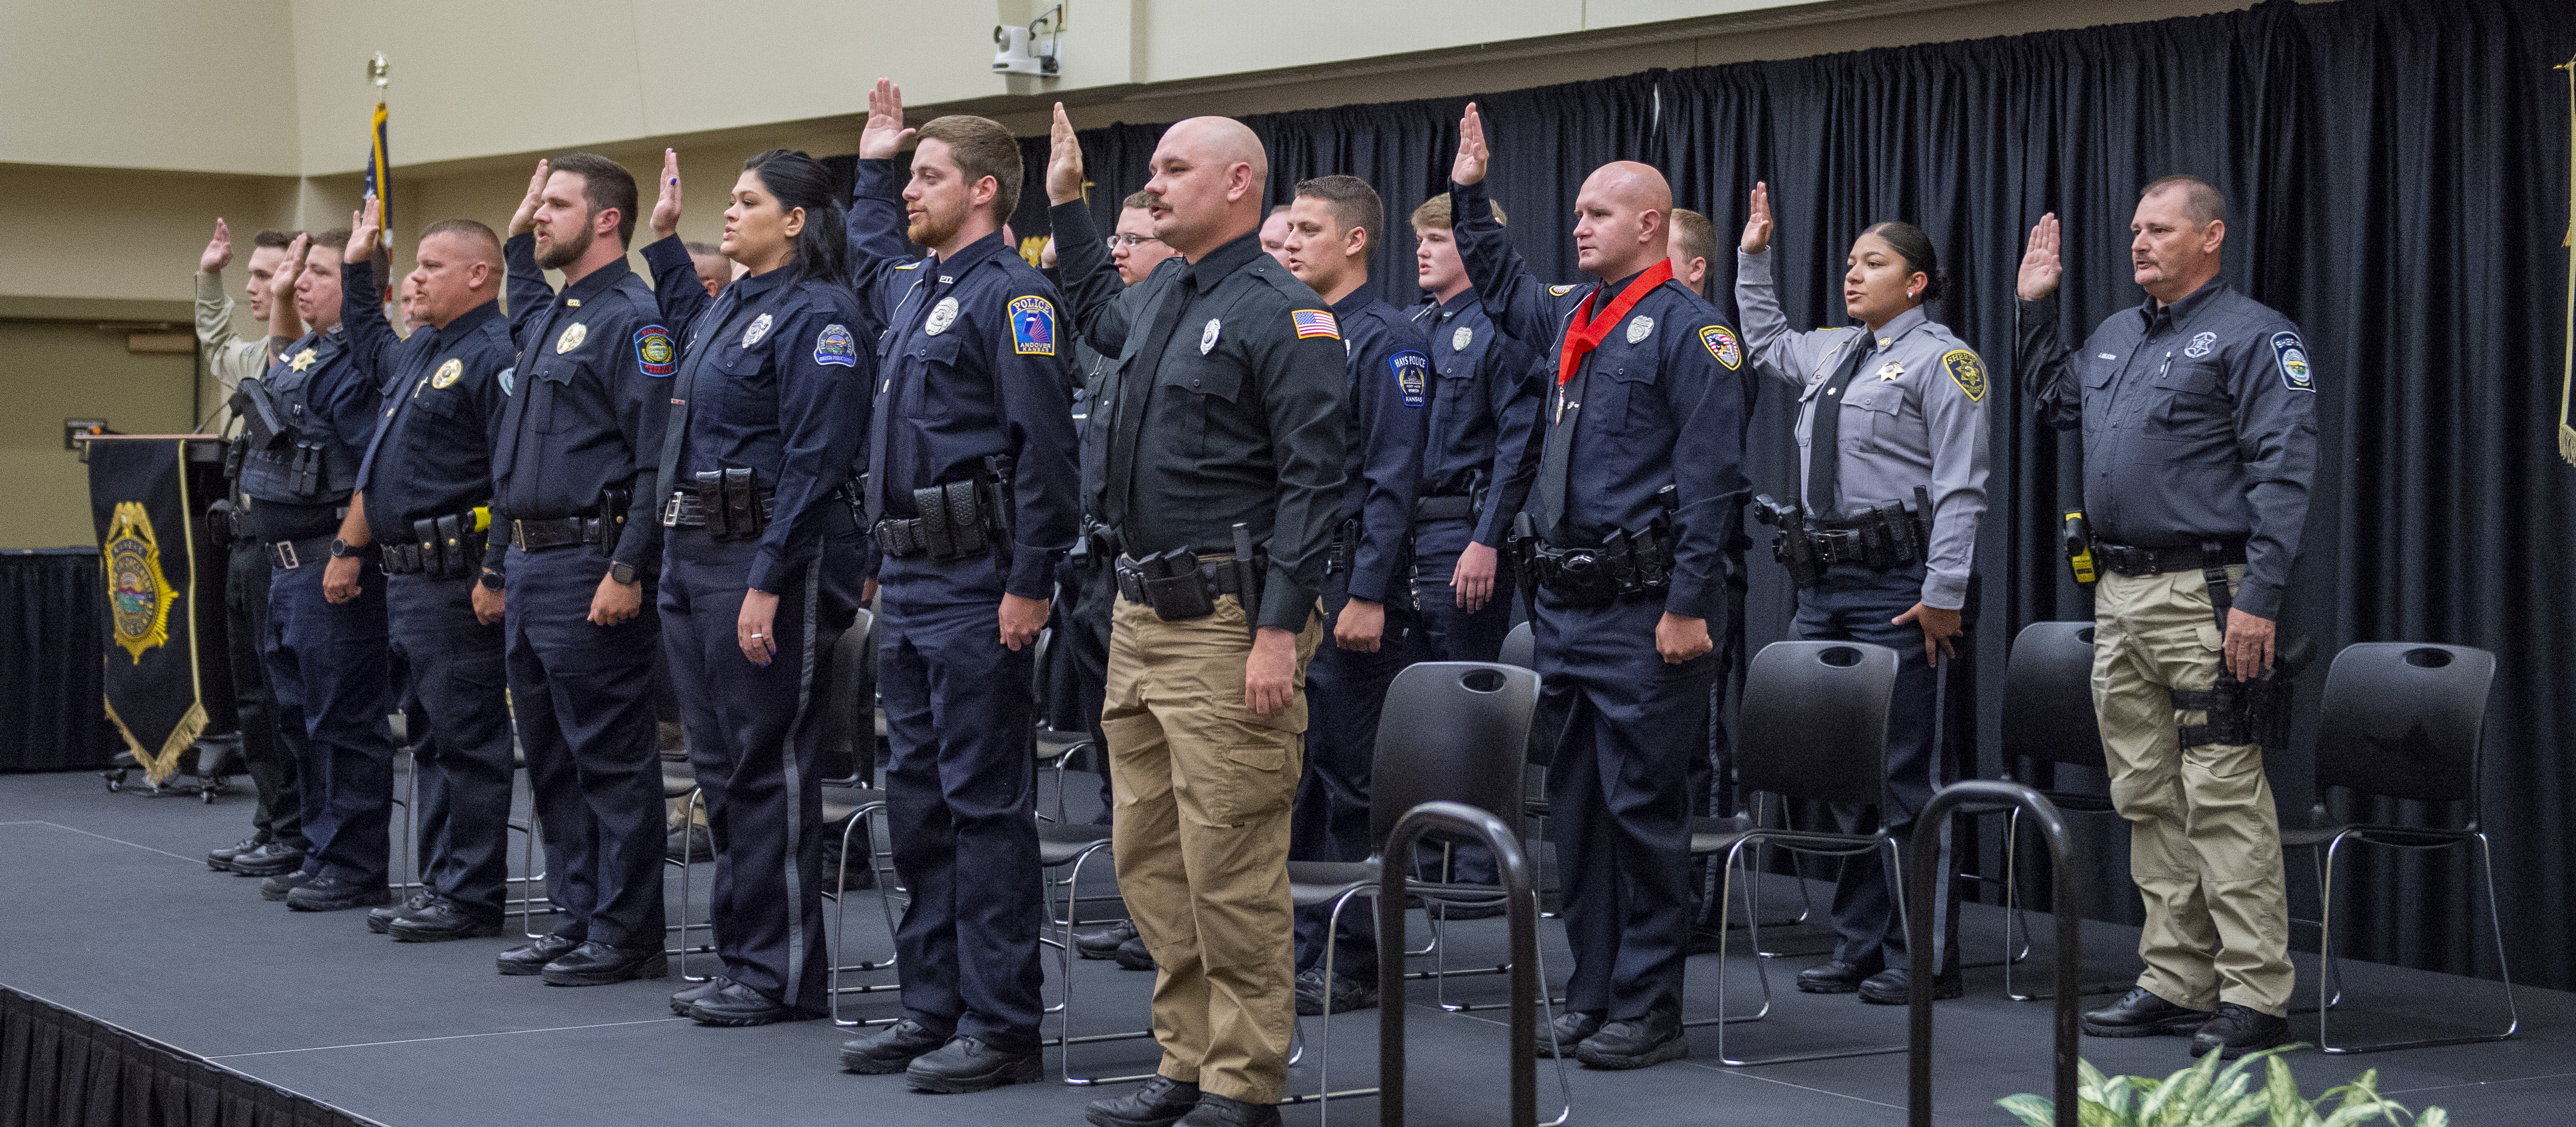 The 297th basic training class recites the oath of office.